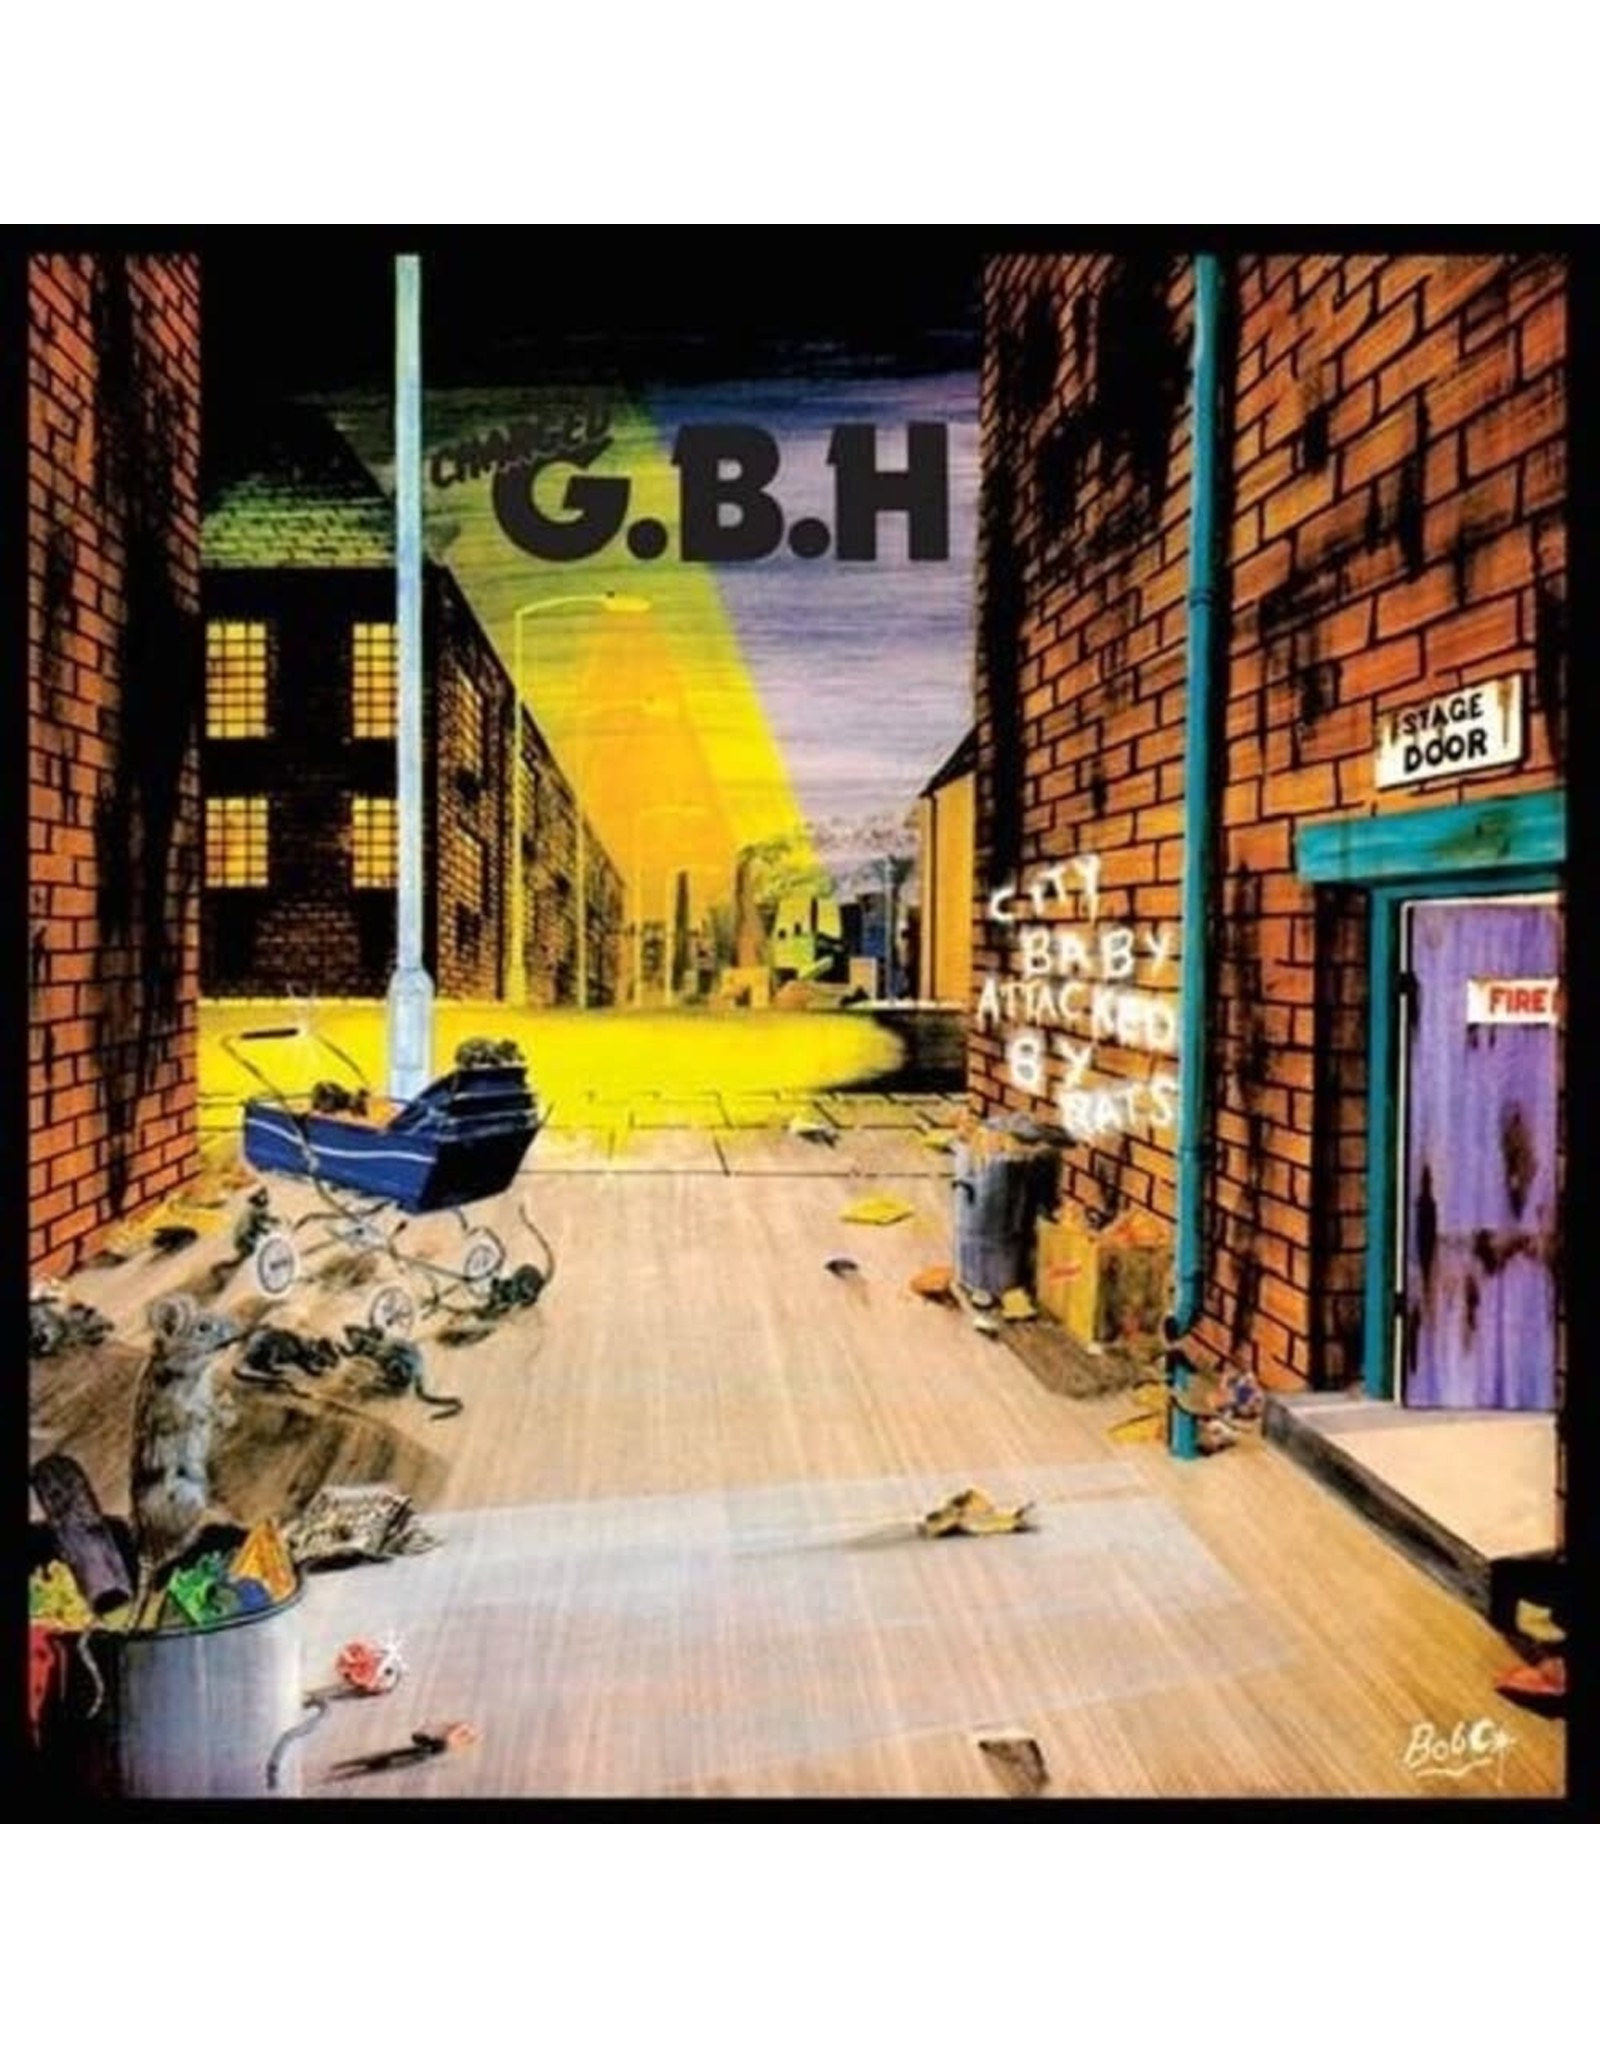 G.B.H. - City Baby Attacked By Rats (Record Store Day) [Lime Green Vinyl]